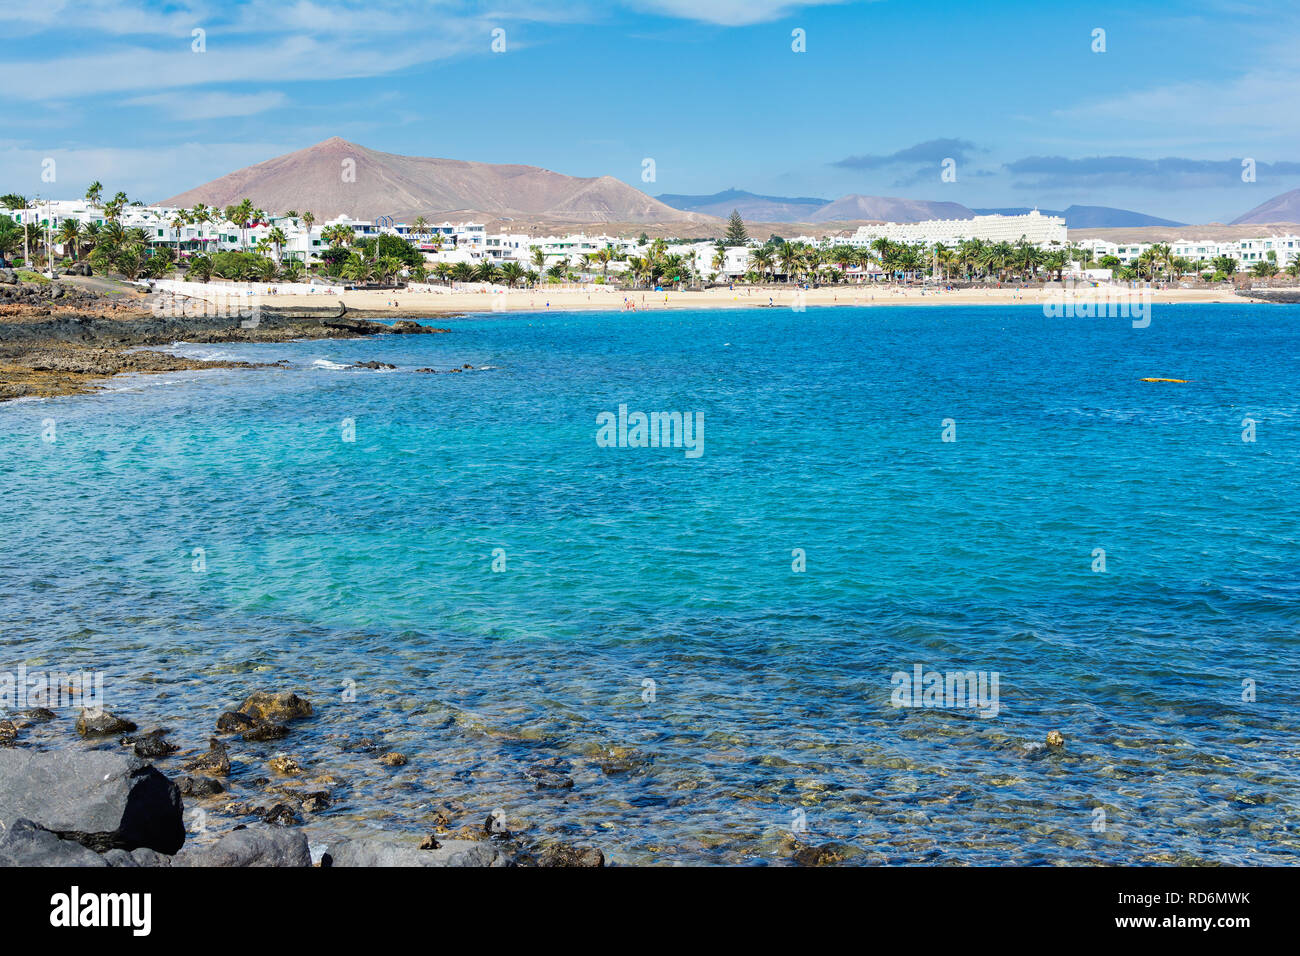 View of Playa de las Cucharas beach in Costa Teguise, Lanzarote, Spain, turquoise waters, selective focus Stock Photo